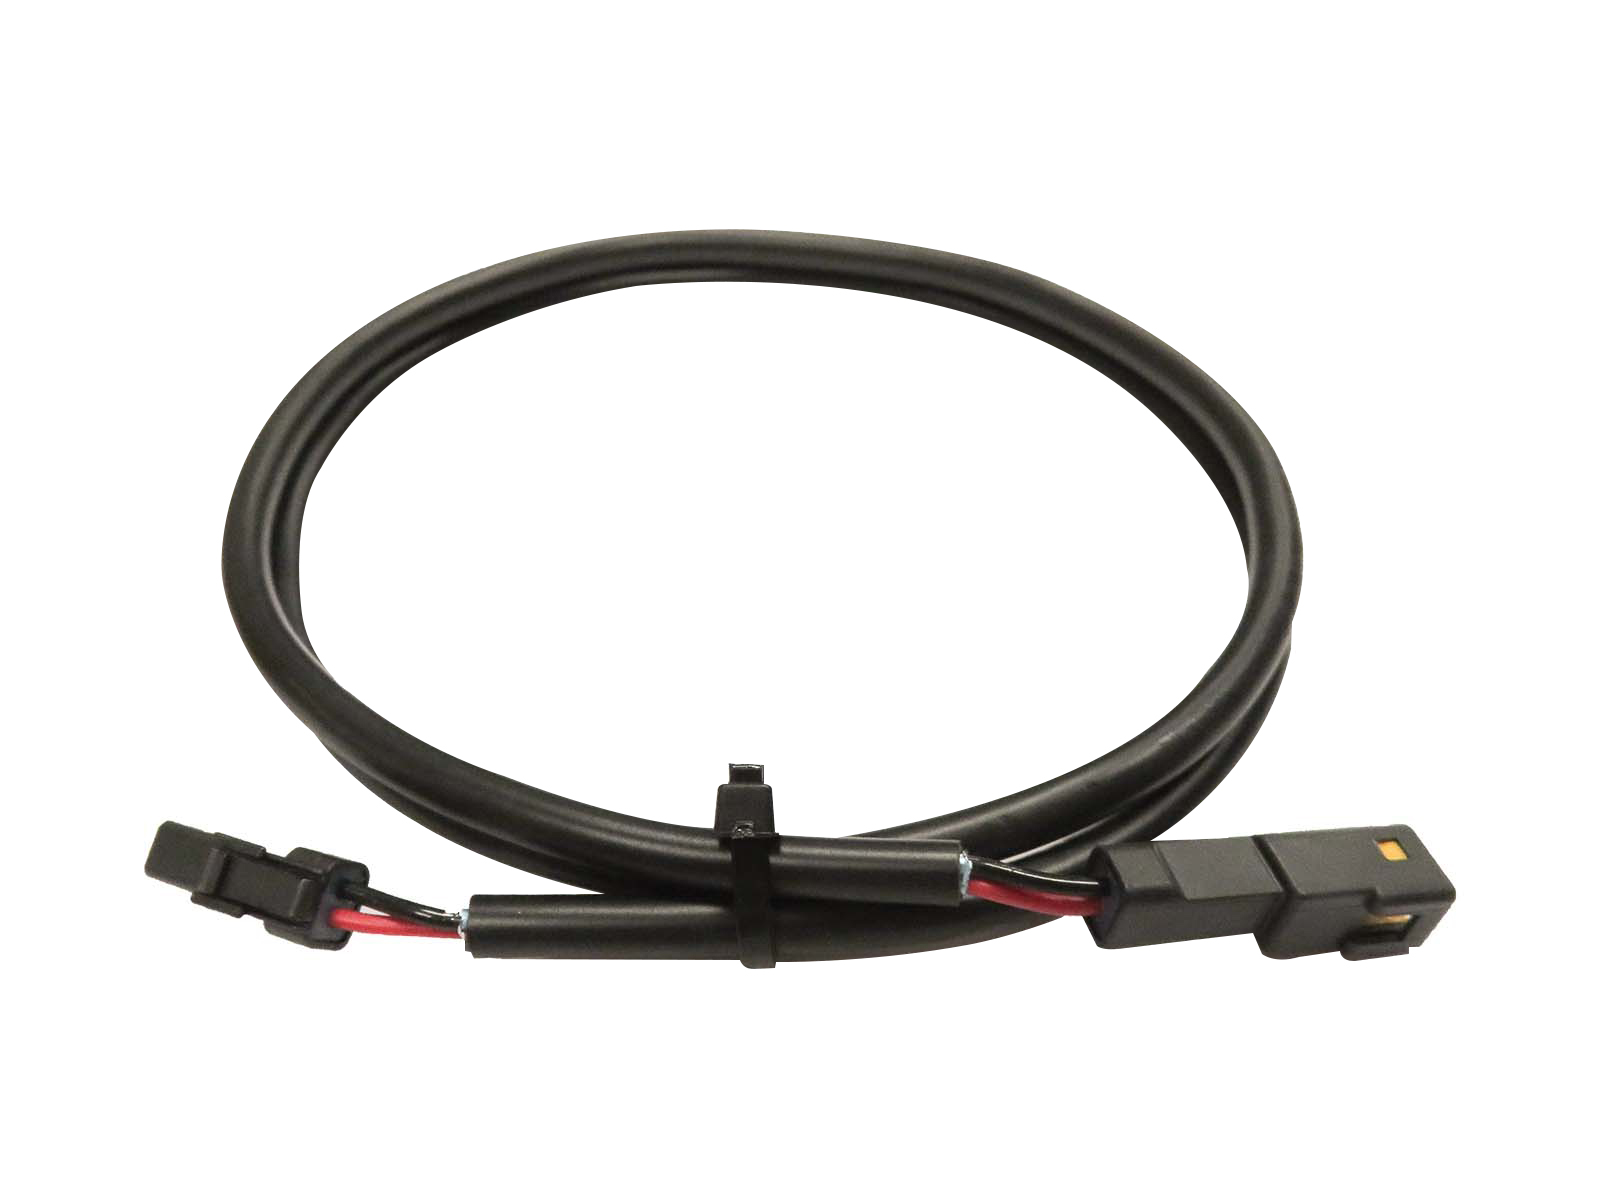 Cable for L88 & L54 LED Modules in coiled position